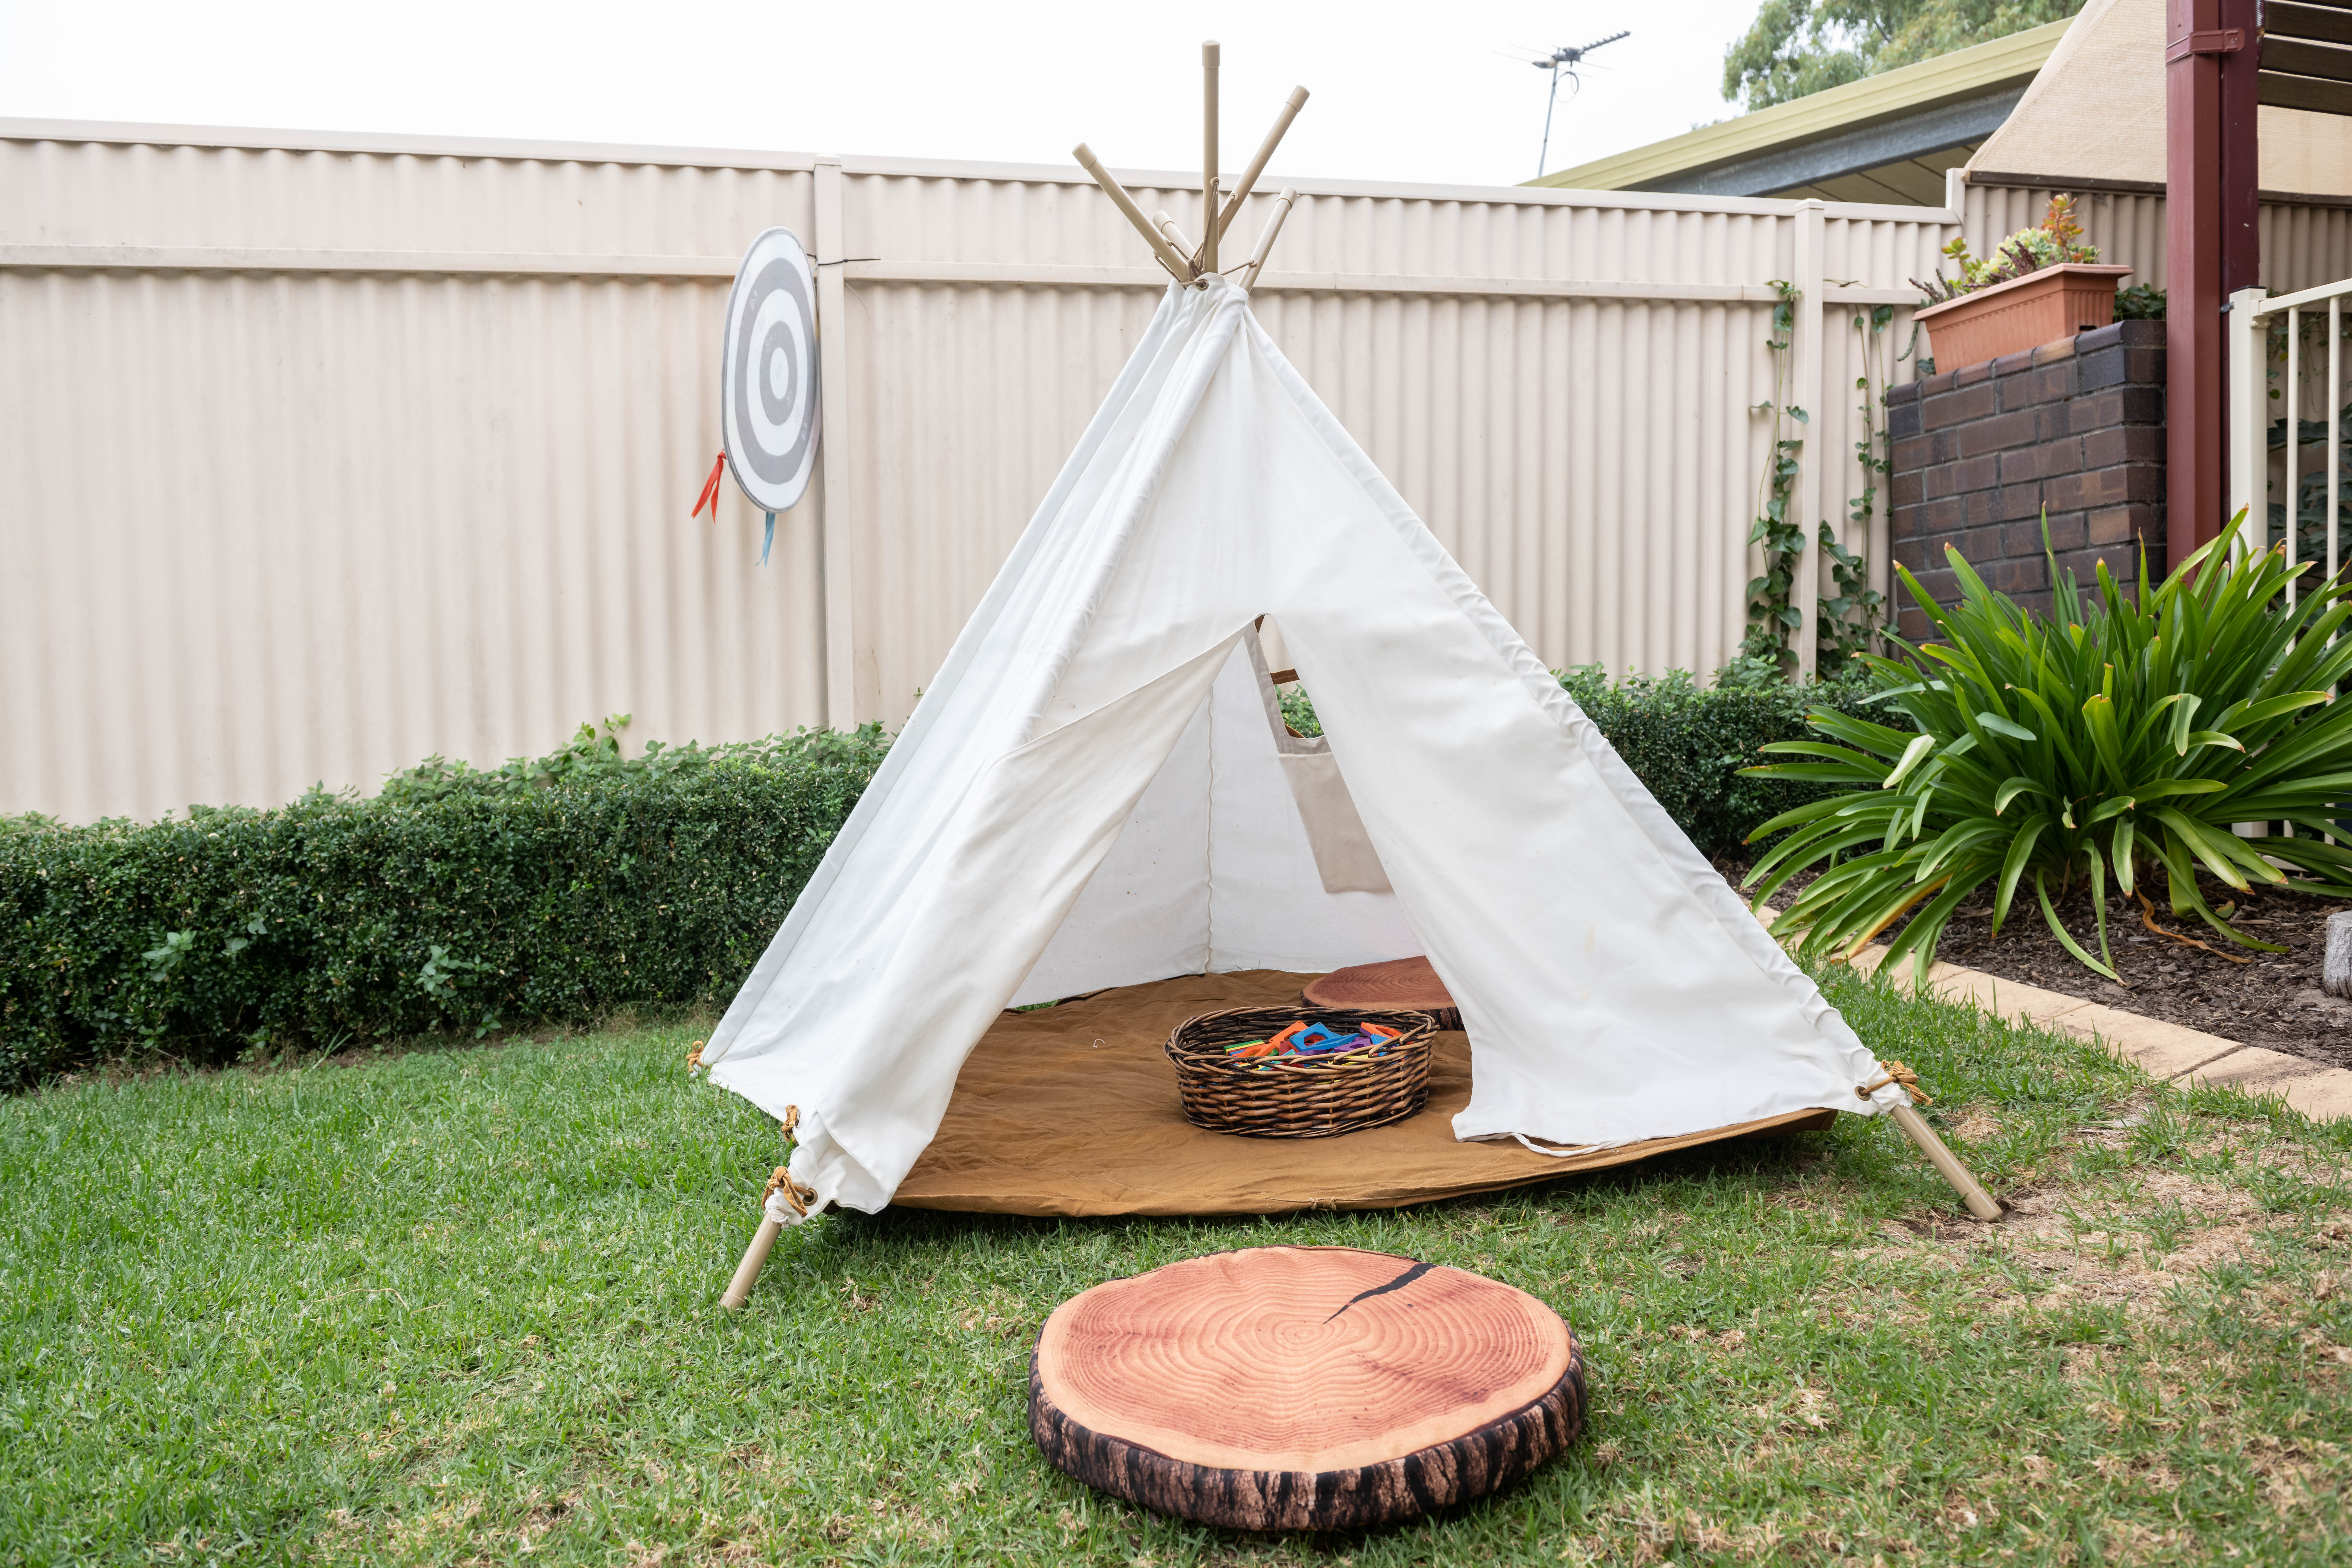 family day care setting – outside teepee play tent on grass